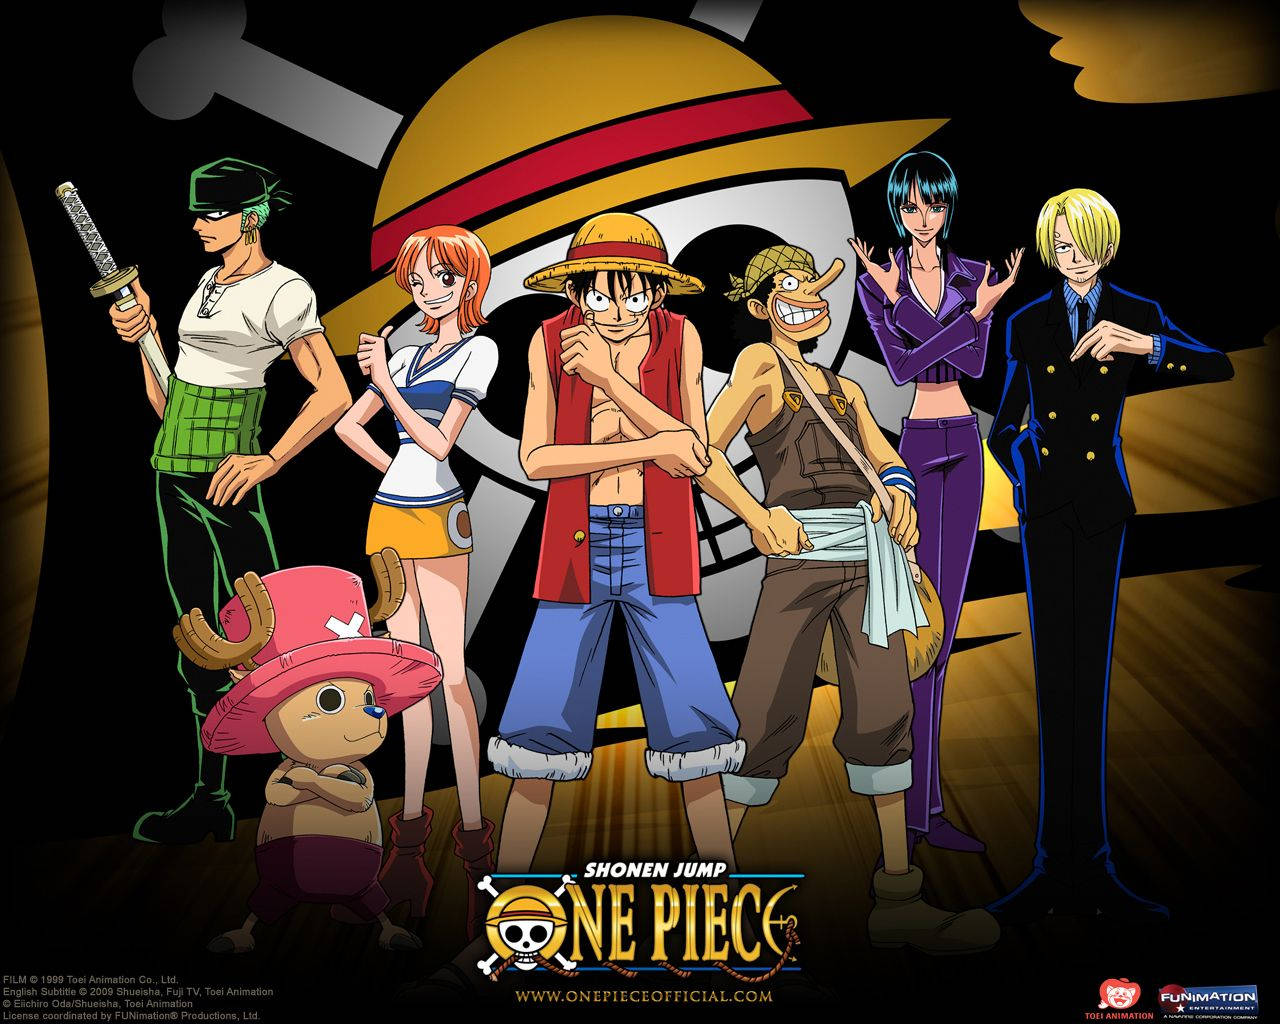 The Straw Hat Pirates Set Sail In Search Of Adventure Background